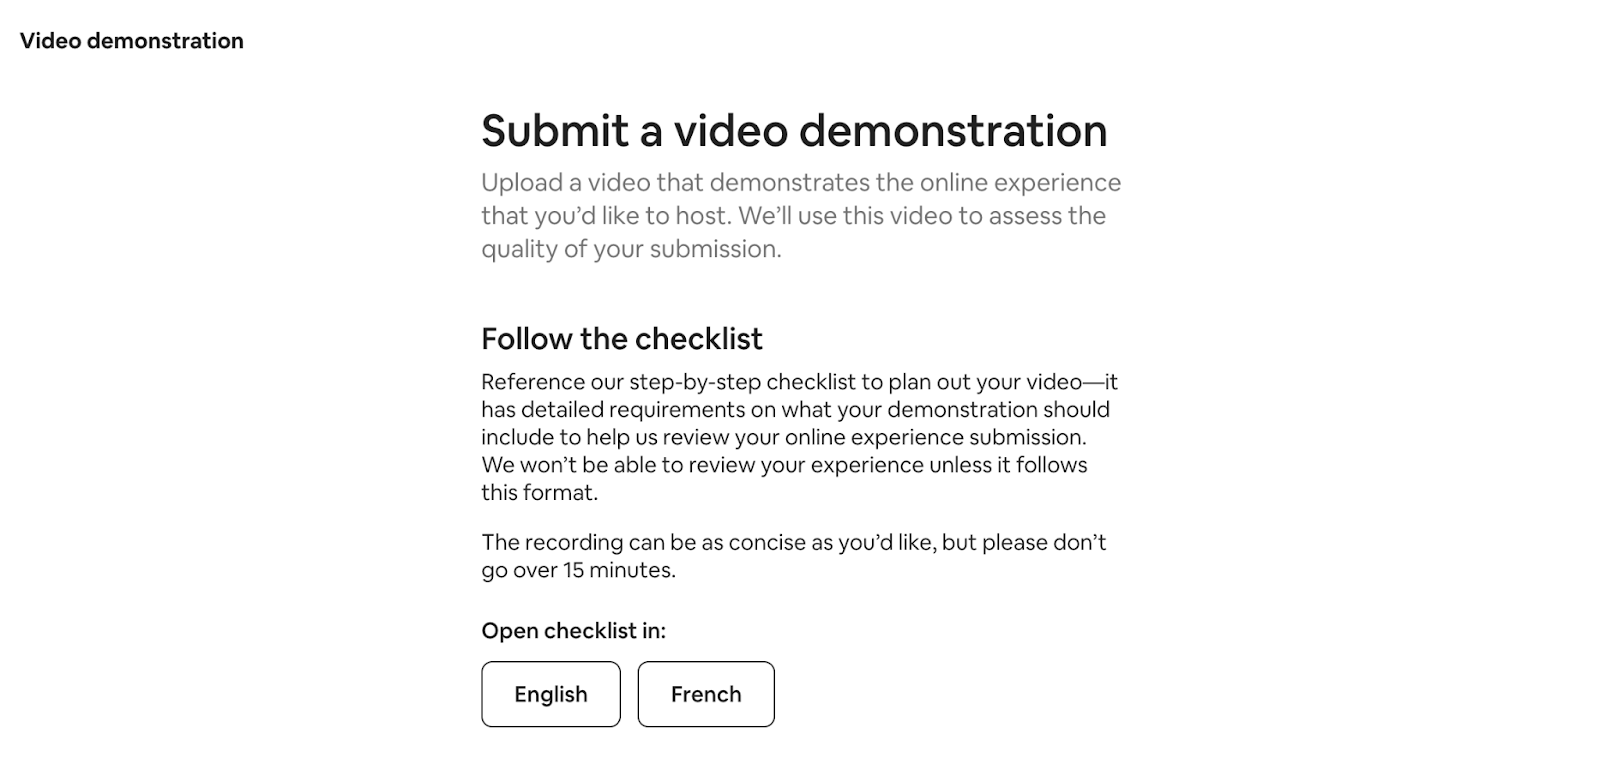 Submit a video demonstration airbnb example